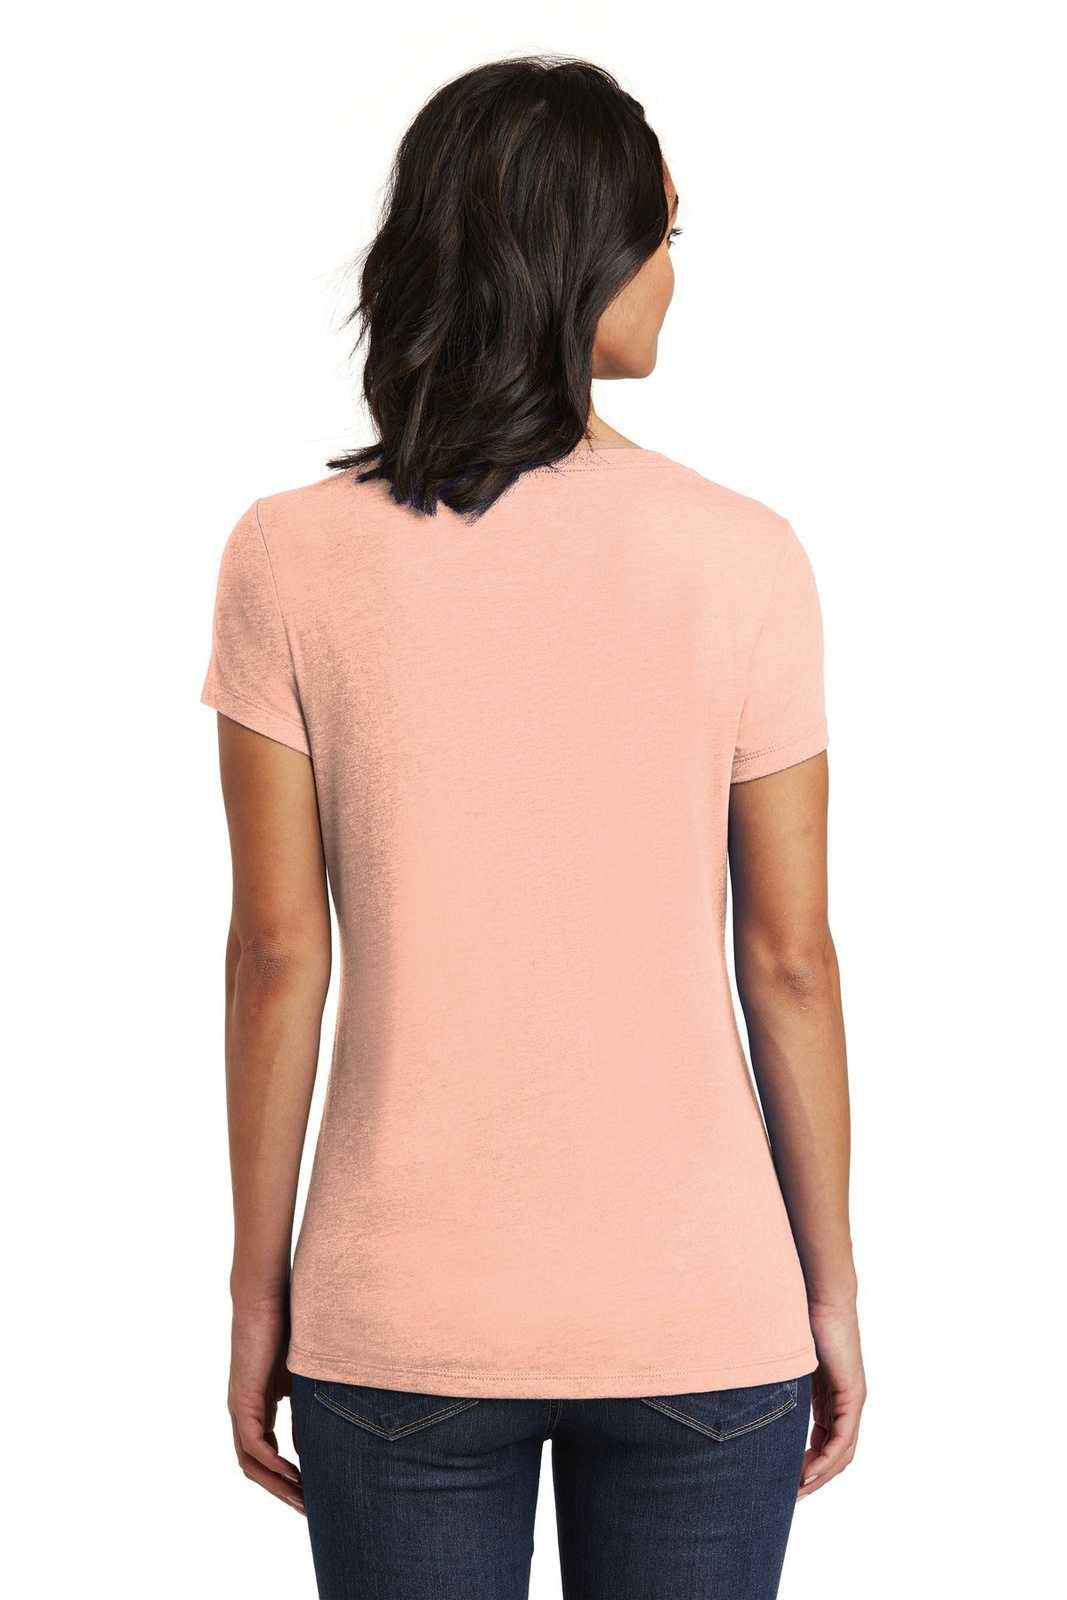 District DT6503 Women's Very Important Tee V-Neck - Dusty Peach - HIT a Double - 1